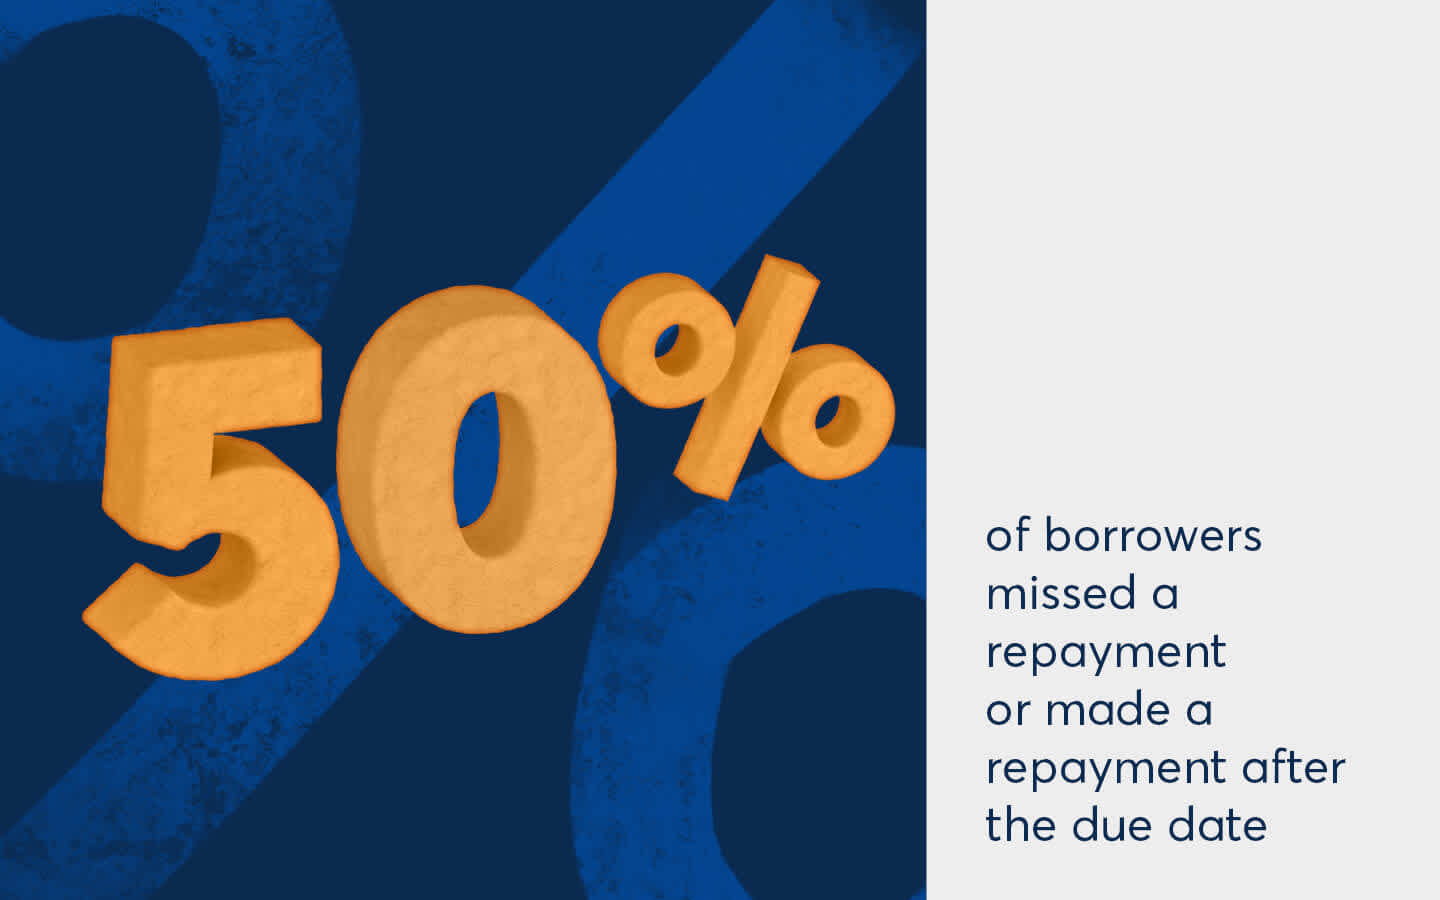 guides > images > borrowers-survey > loan-borrower-1